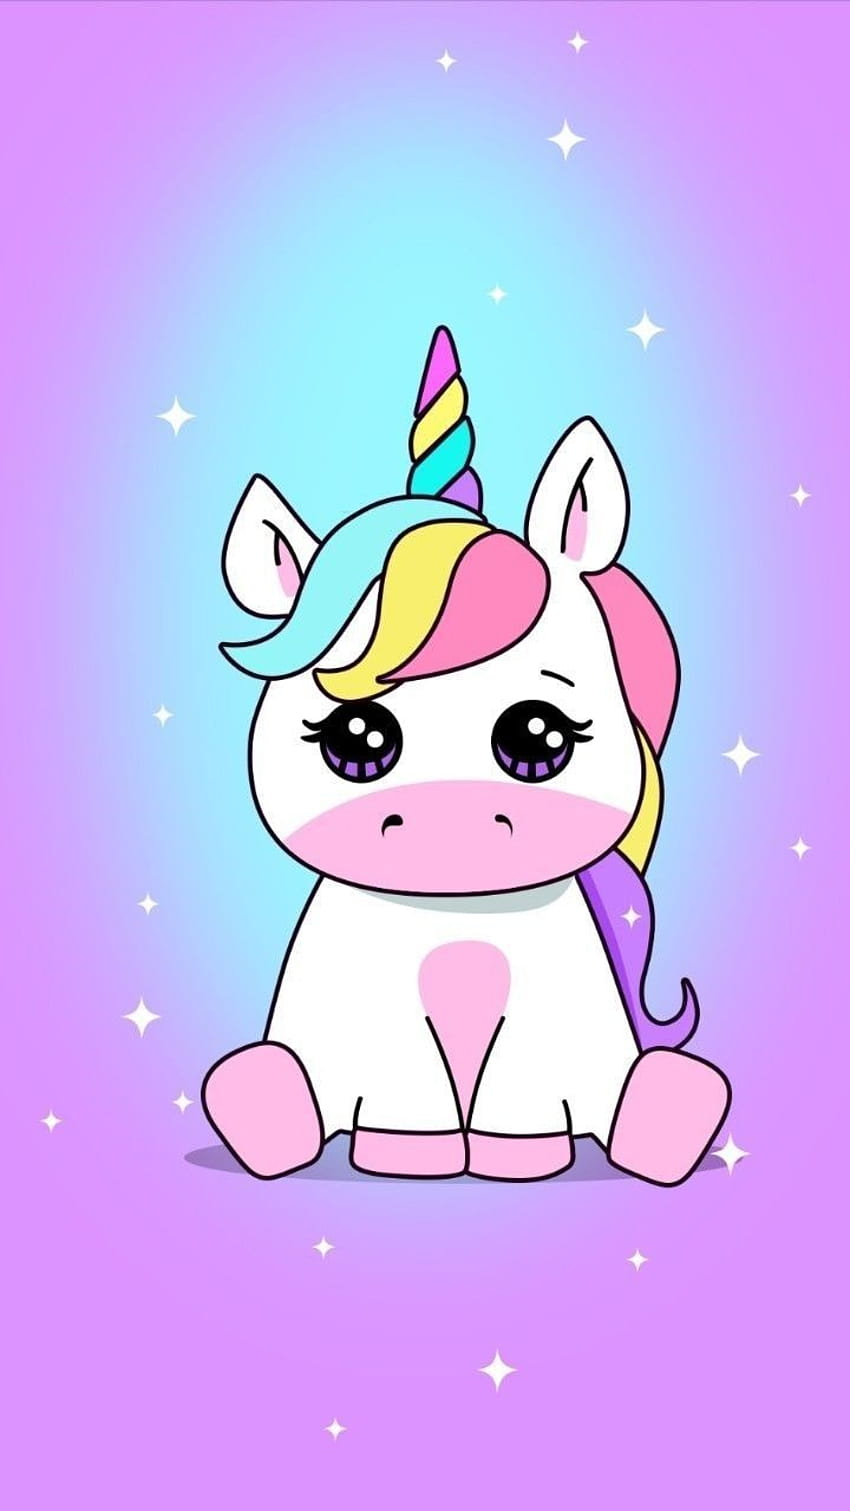 🦄 How to Draw a Cute Unicorn | Easy Drawing for Kids - Otoons.net